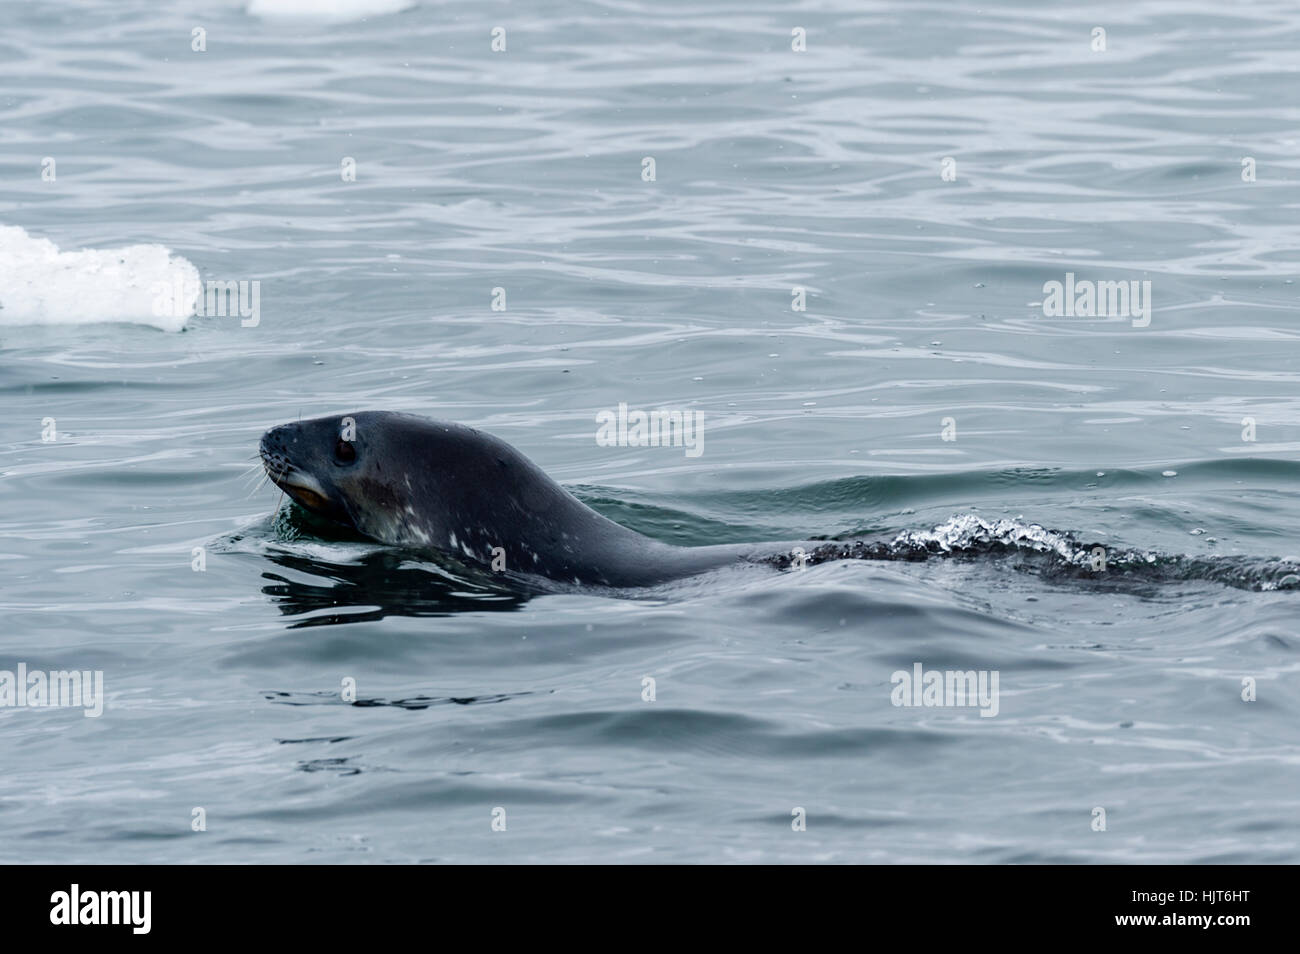 A Weddell Seal swimming in the ocean. Stock Photo